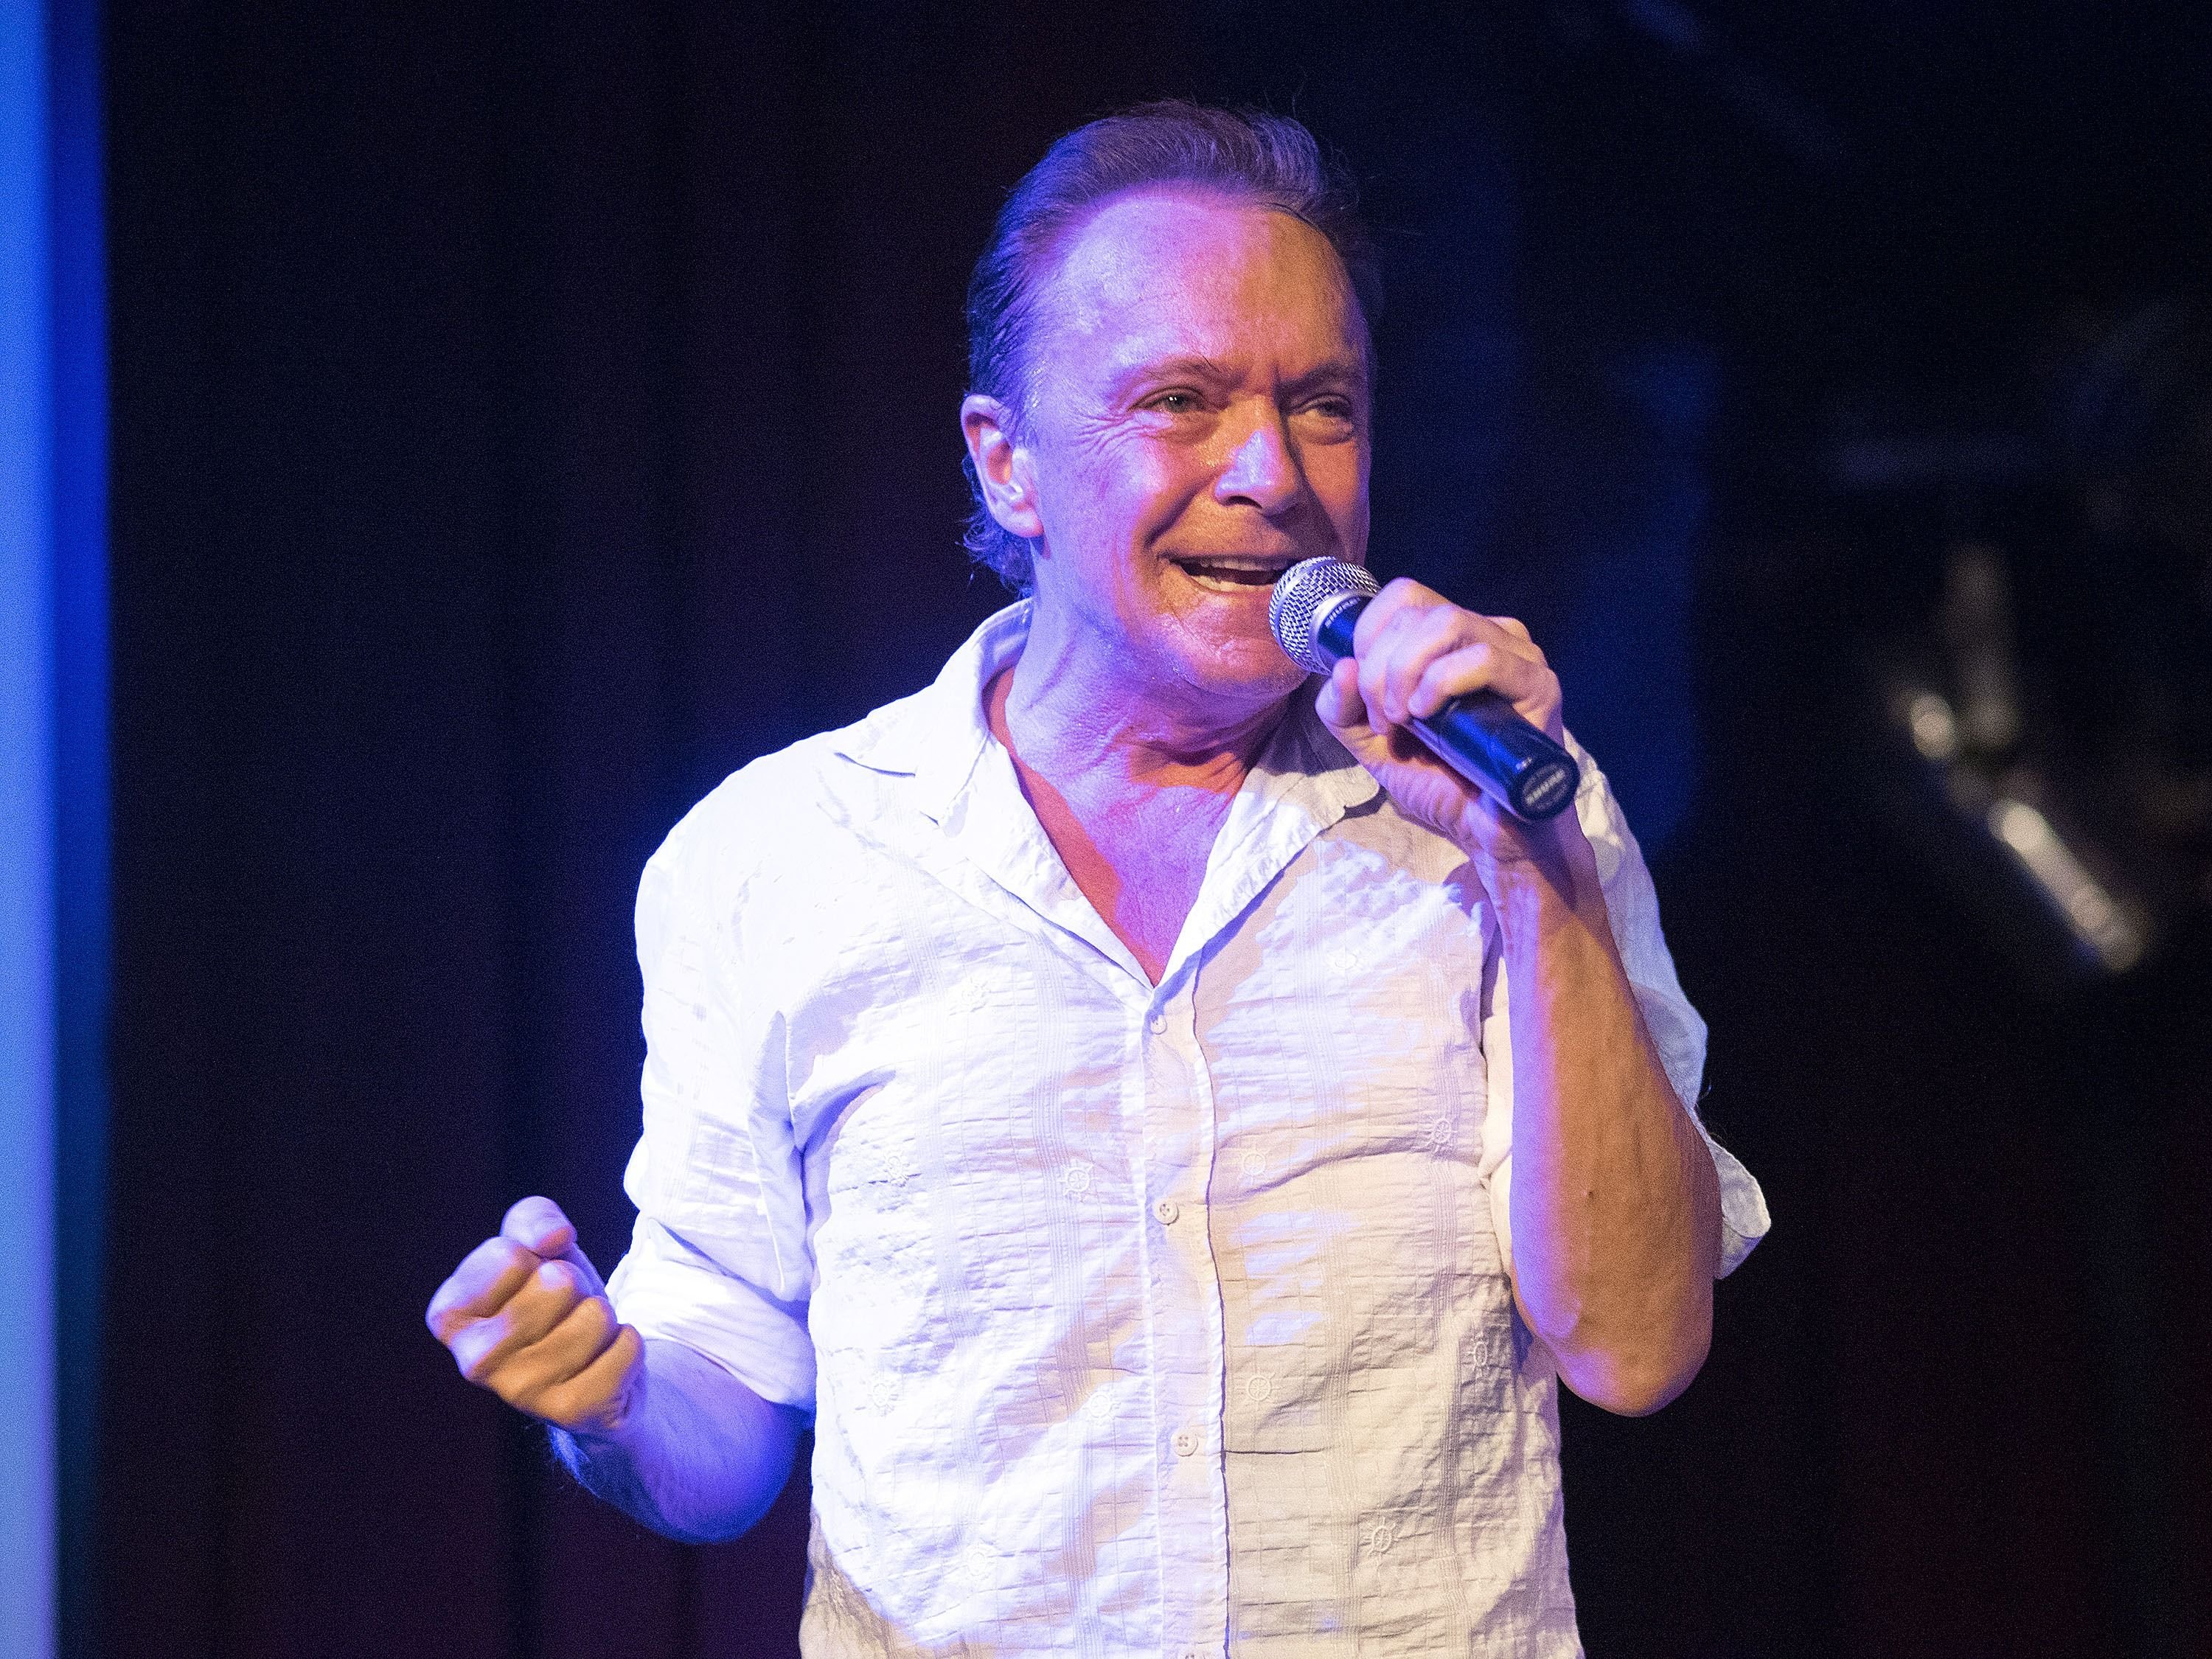 Musician David Cassidy performs at BB King on January 10, 2015 | Photo: Getty Images